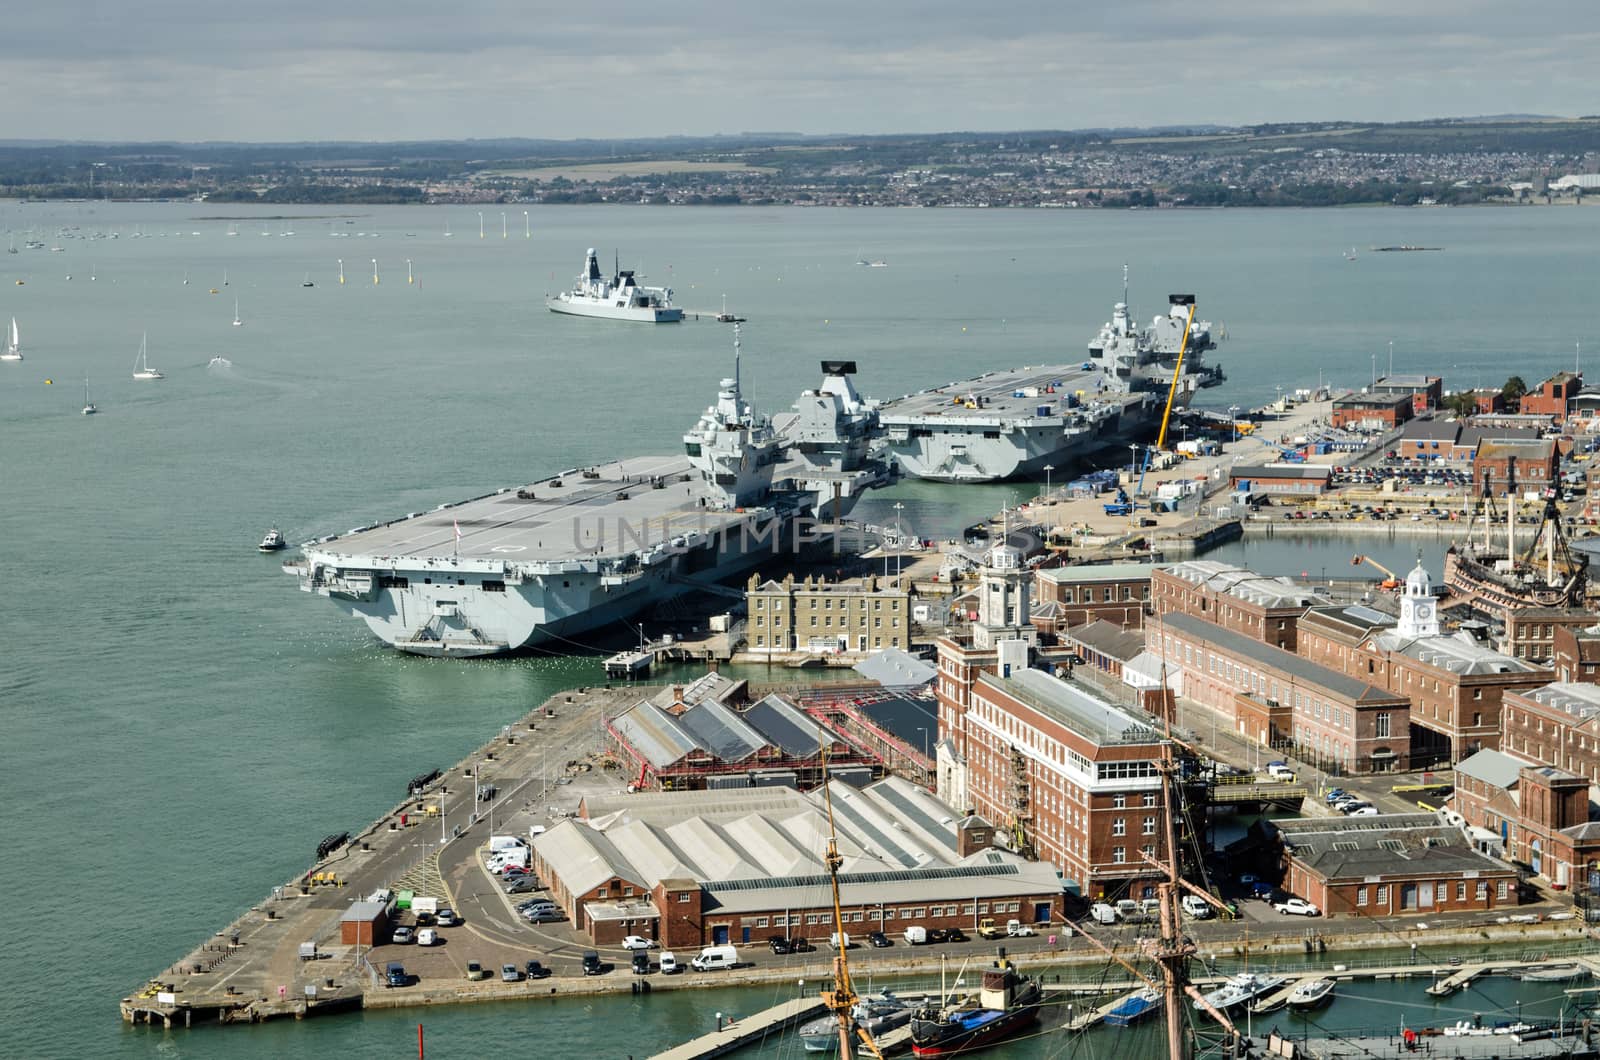 Aerial view of the two largest ships in the Royal Navy, the aircraft carriers Queen Elizabeth and the Prince of Wales moored beside each other in Portsmouth Harbour, Hampshire. To the right of the picture is the Historic Dockyard and the famous Victory which Nelson commanded at the Battle of Trafalgar.